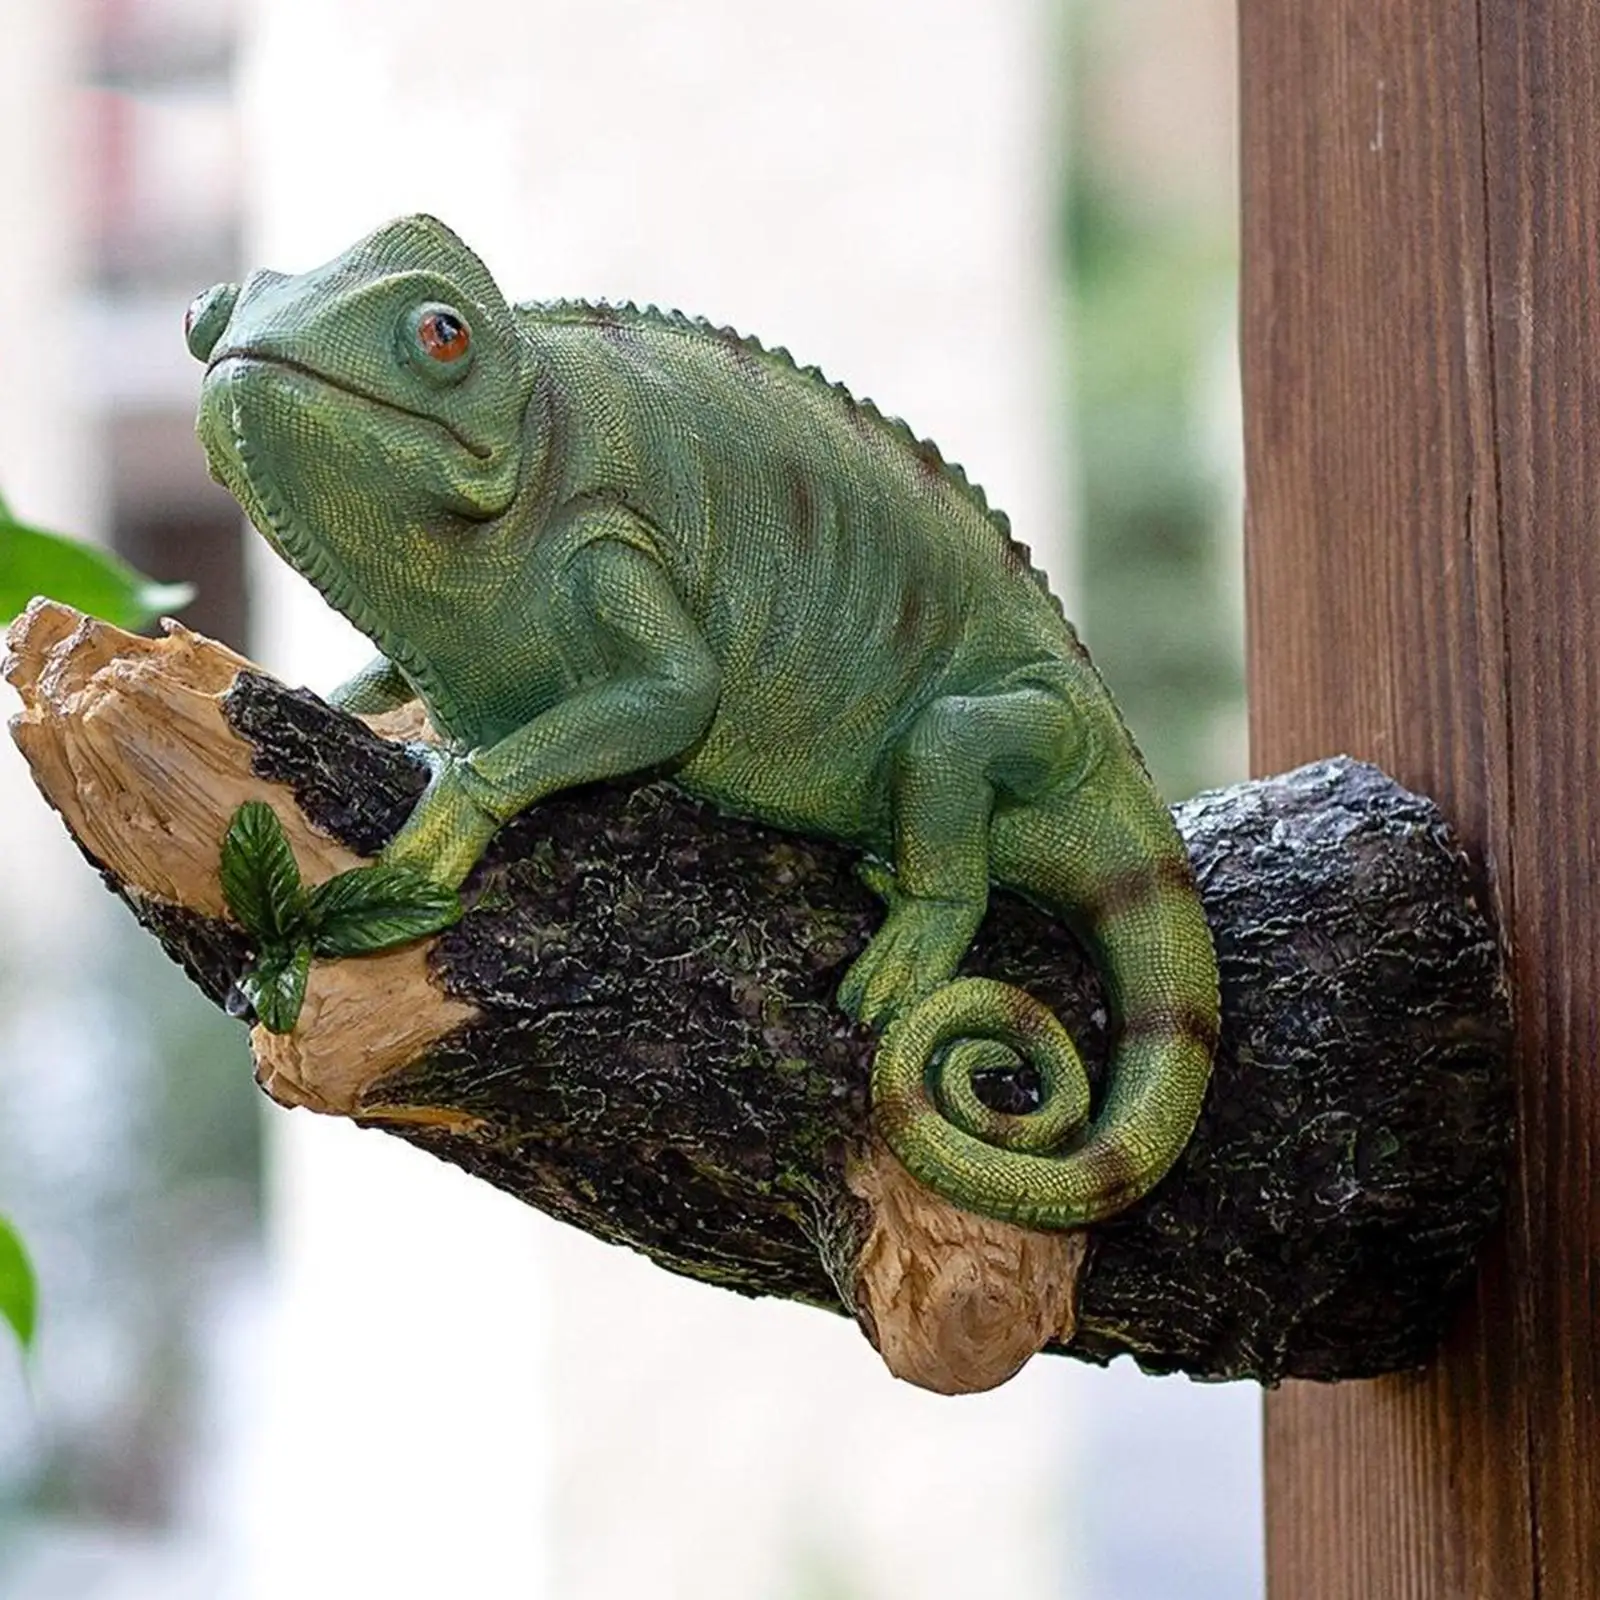 

Wall Mounted Resin Chameleon Figurine Craft Lizard Statue for Home Garden Outdoor Tree Decoration